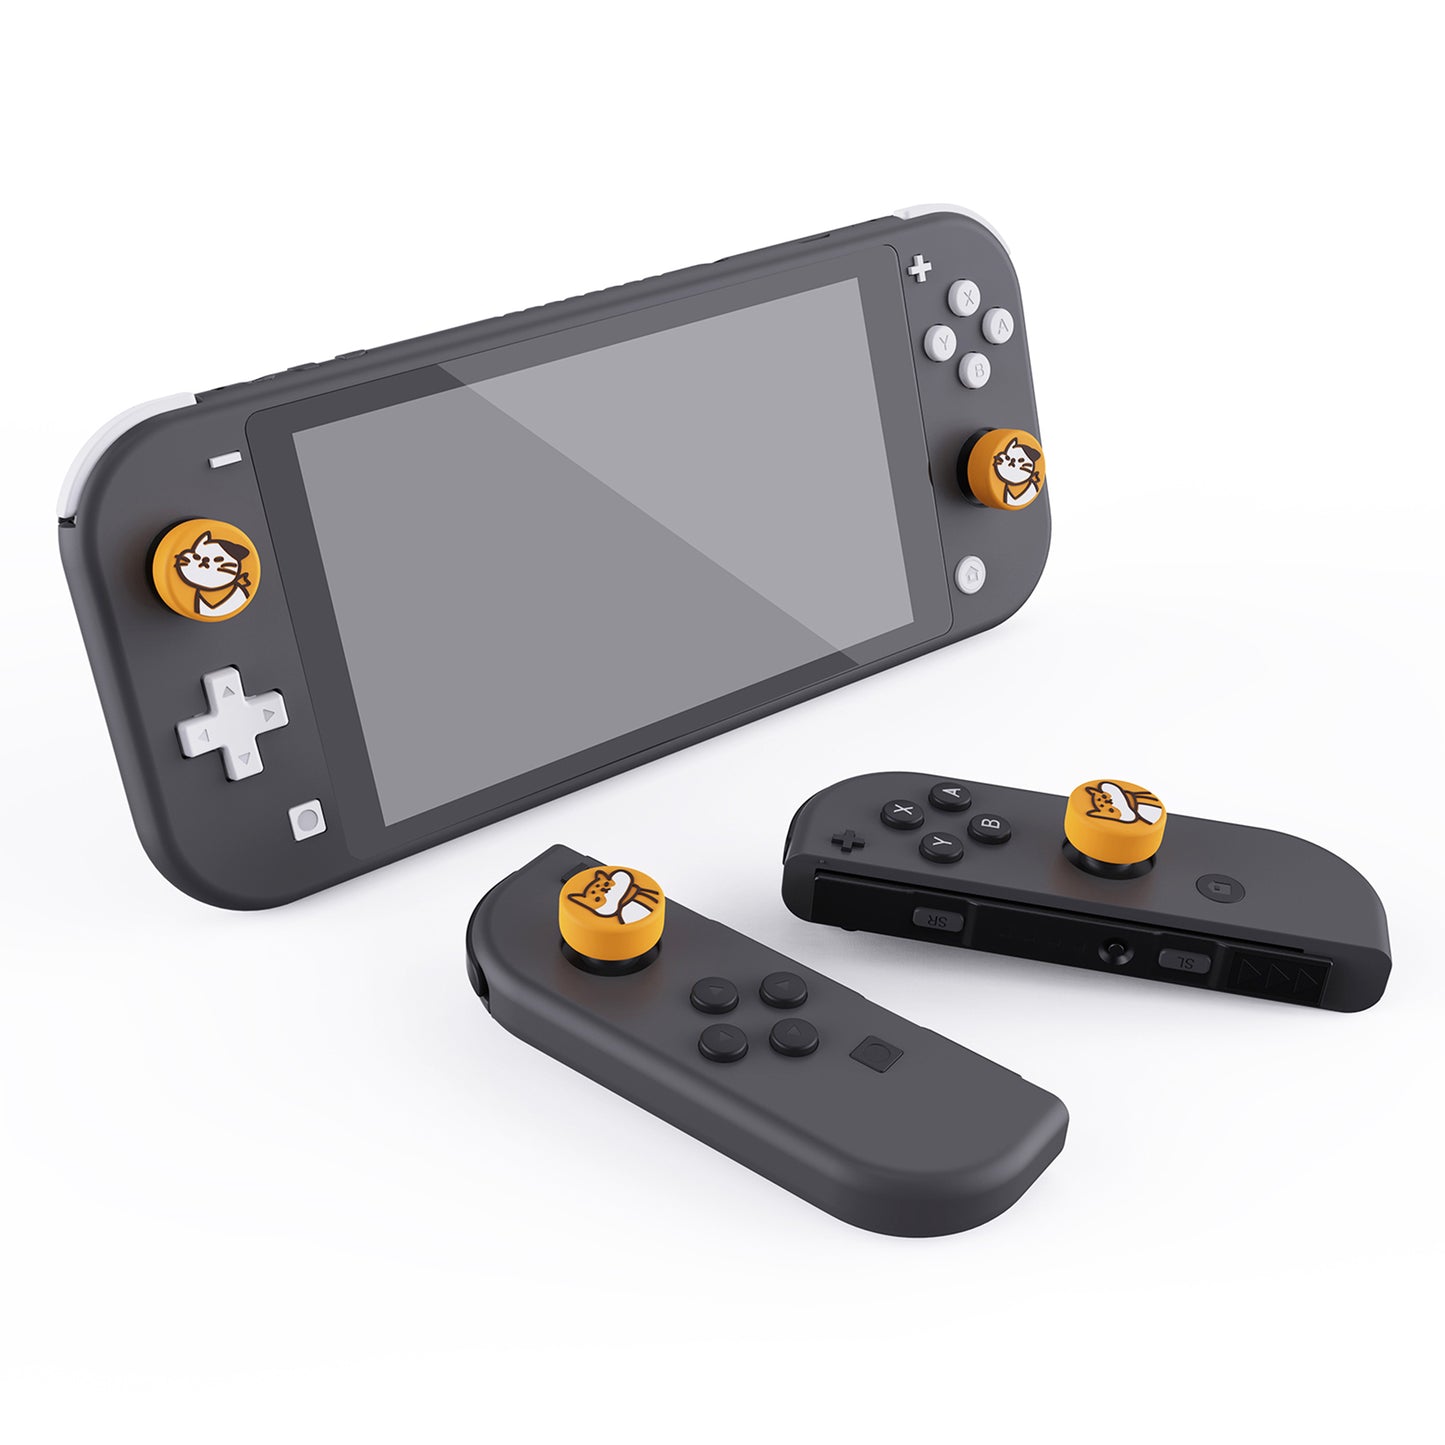 PlayVital Kitten & Doggie Cute Switch Thumb Grip Caps, Joystick Caps for Nintendo Switch Lite, Silicone Analog Cover Thumbstick Grips for Switch OLED Joycon - Caution Yellow - NJM1114 playvital